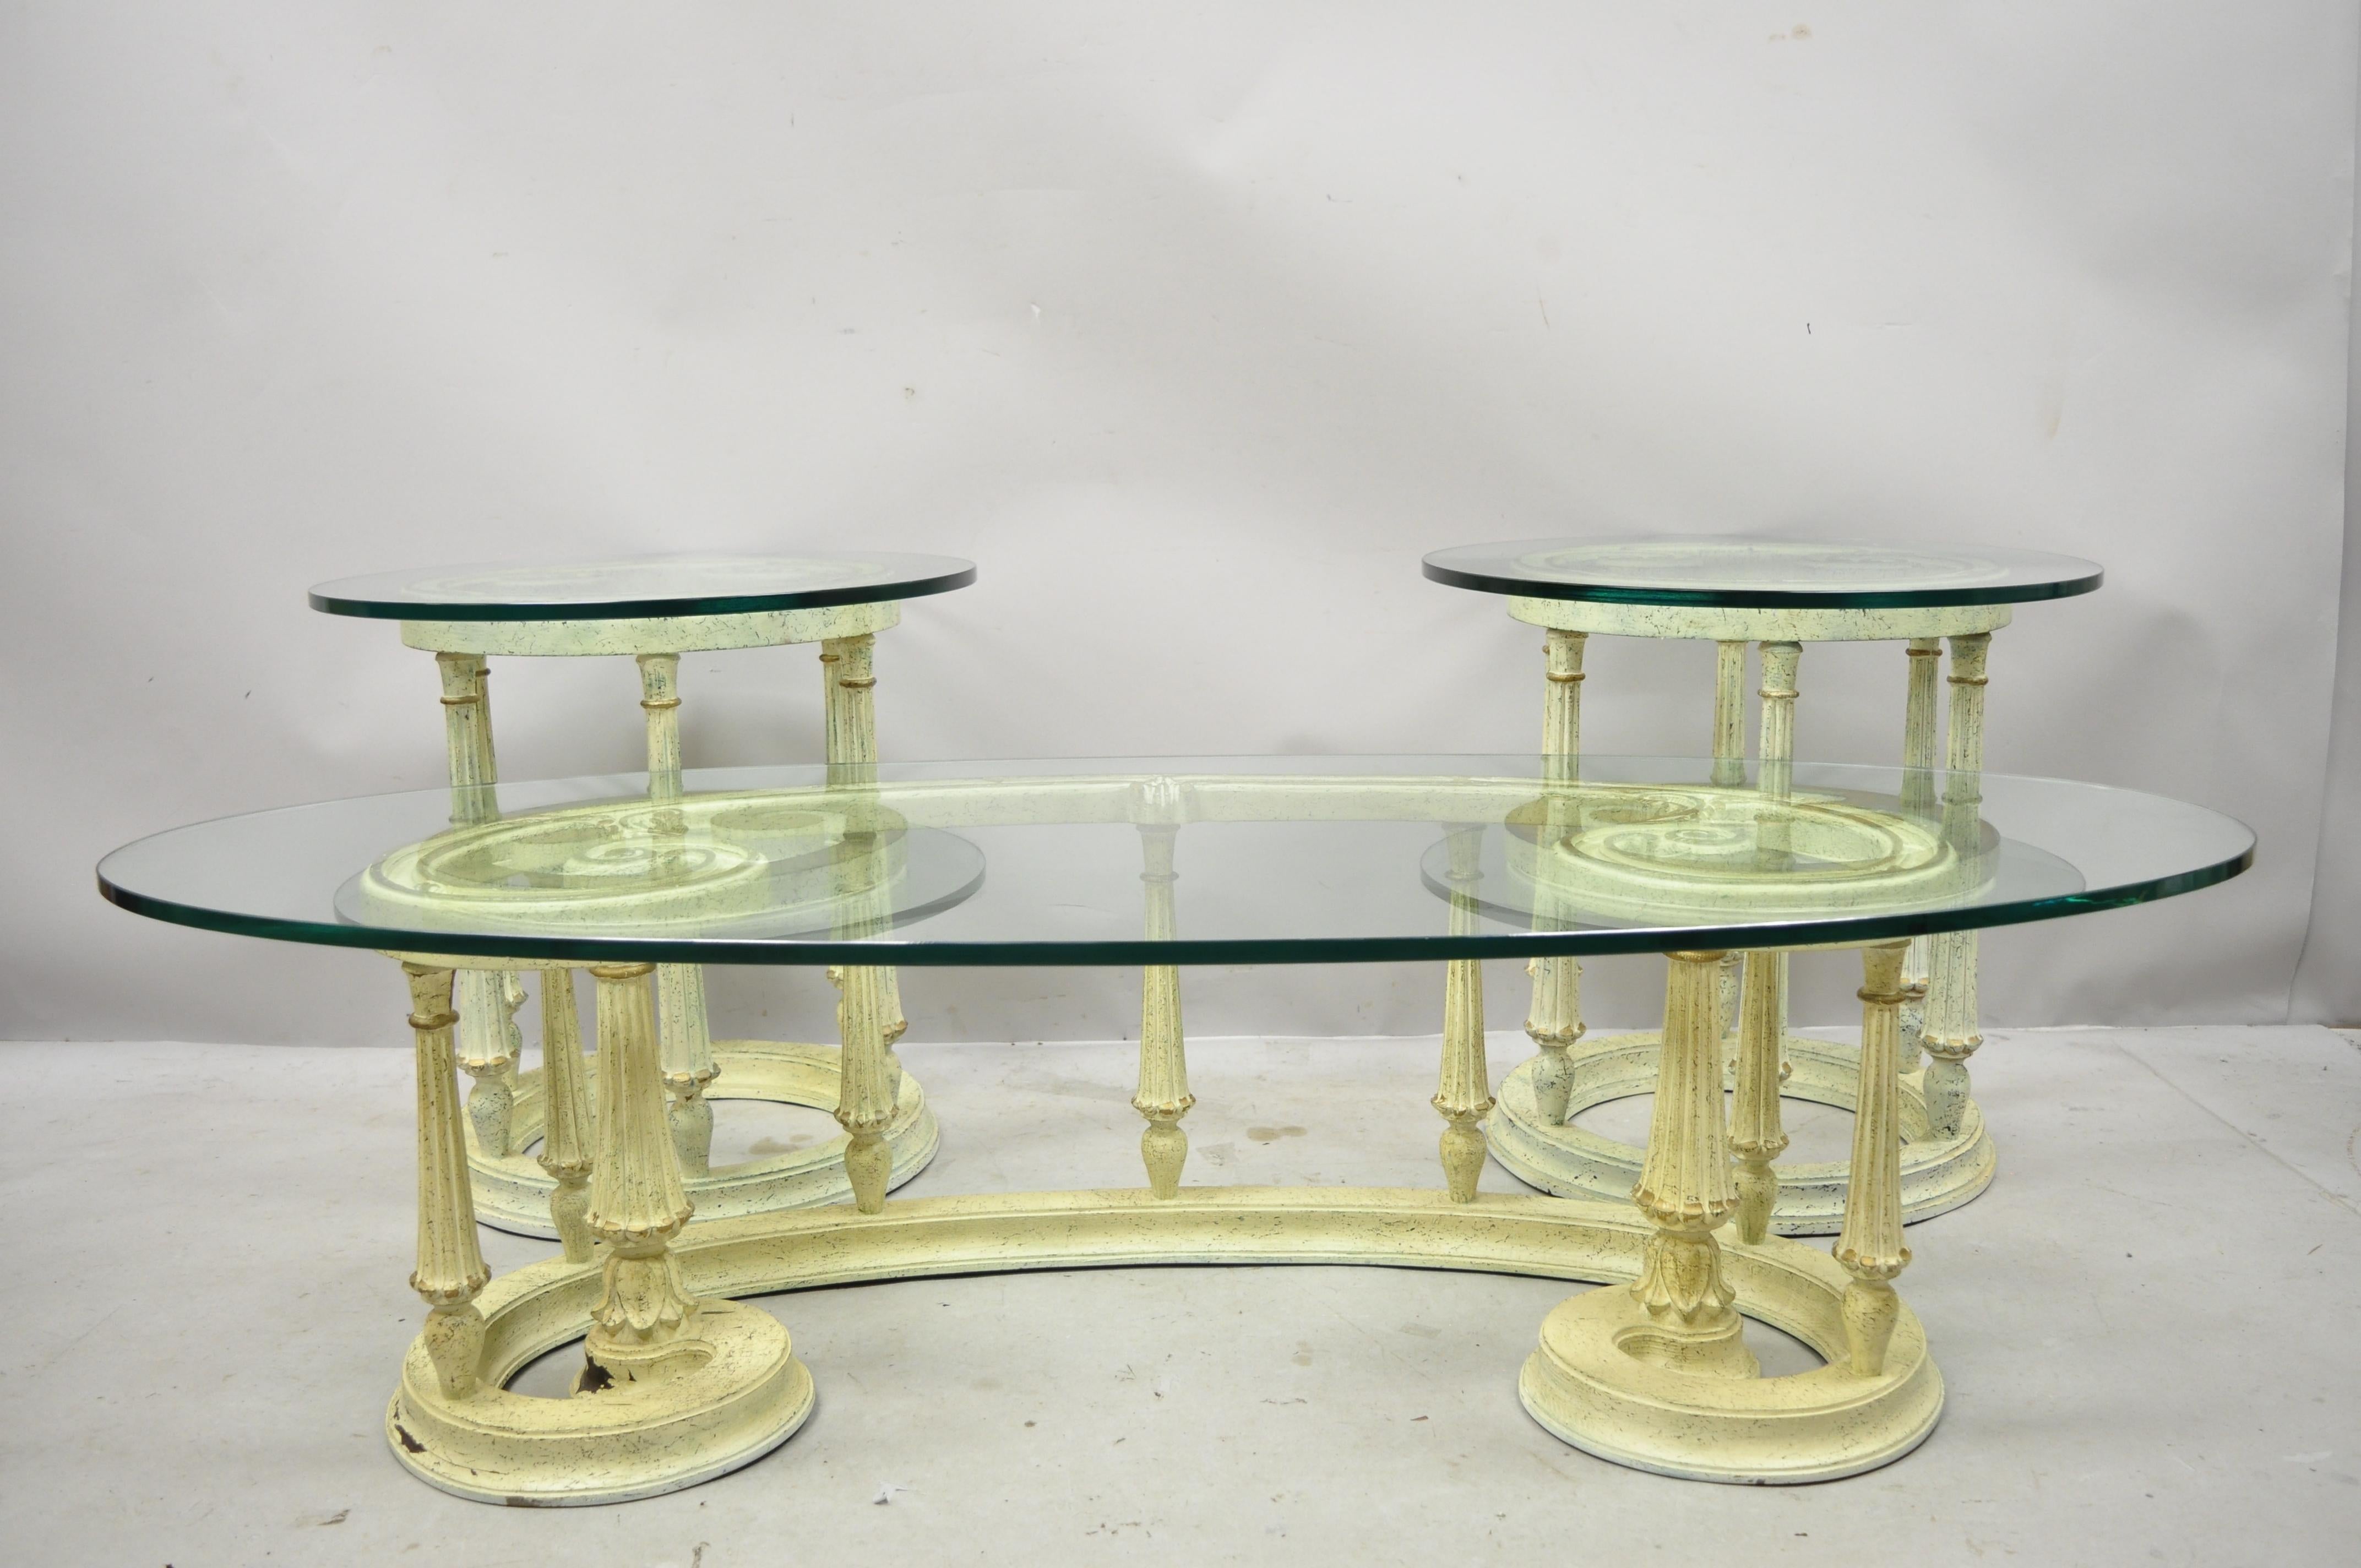 French Provincial Italian Scrollwork Wood Base Glass Top Coffee Table, 3 Pc Set In Good Condition For Sale In Philadelphia, PA